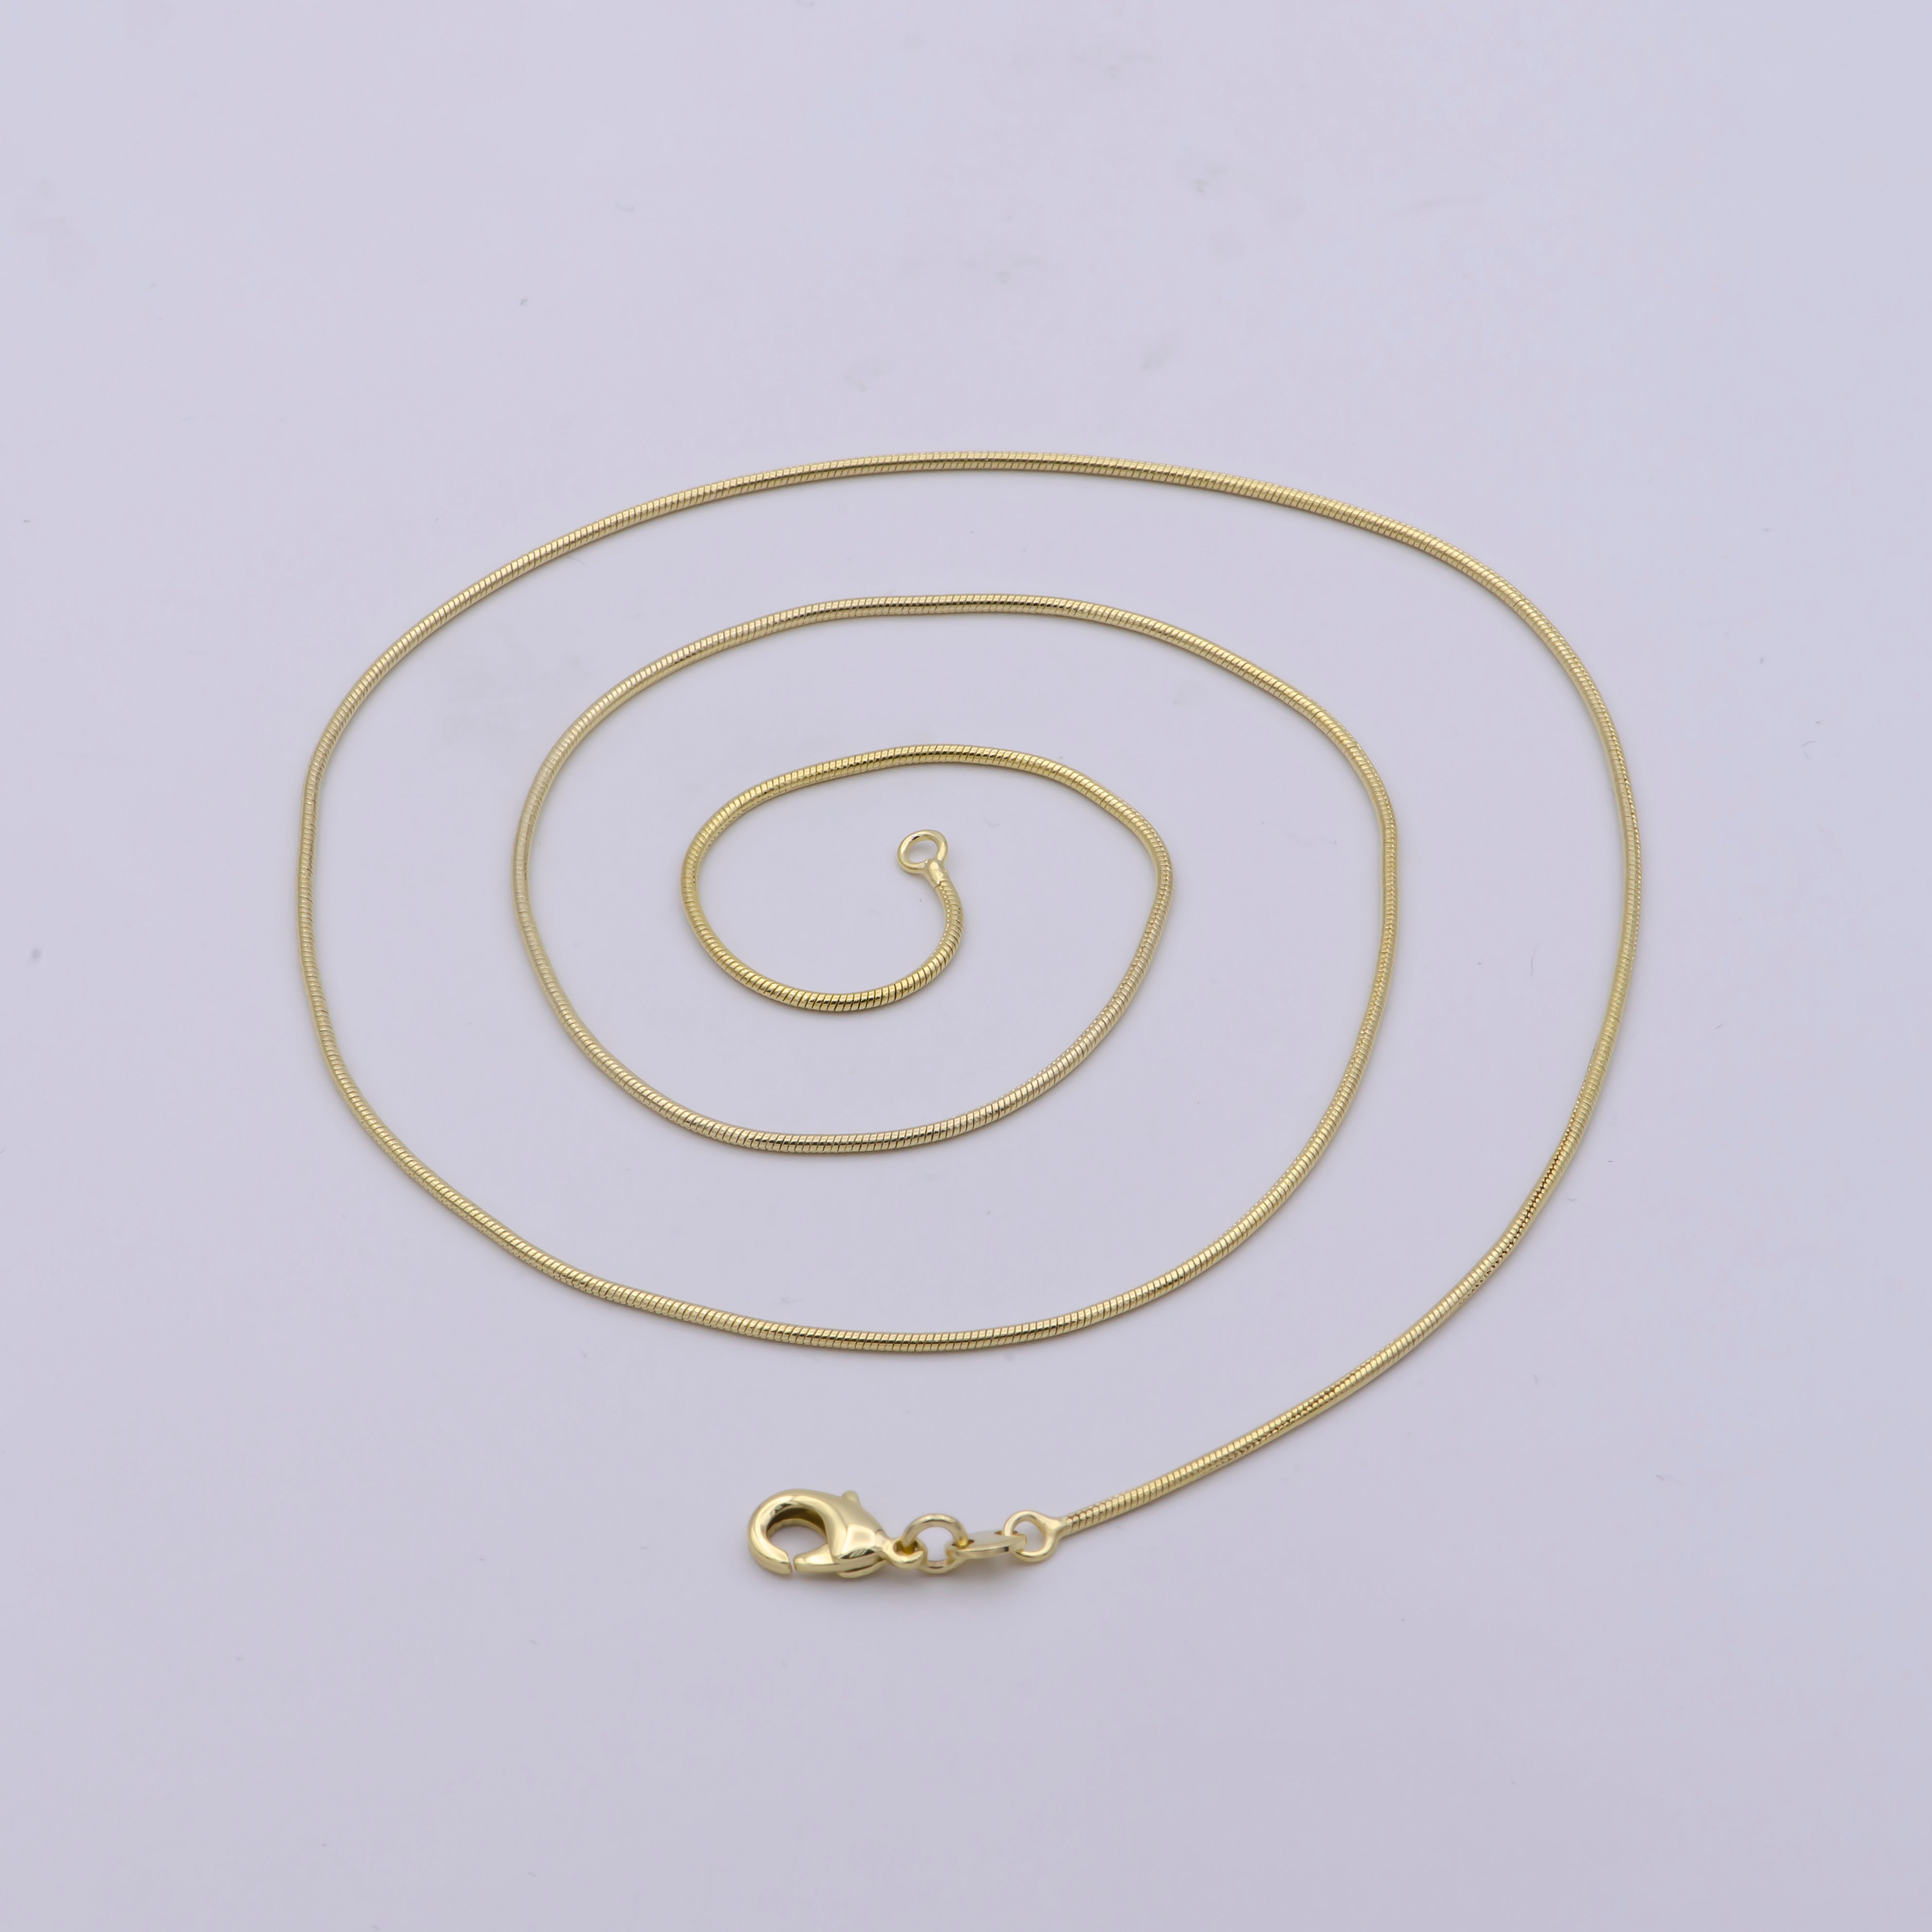 14k Gold Filled Herringbone Chain Necklace - Dainty 1mm Gold Snake Chain - 18, 20 Inches Layering Necklace Ready To Wear w/ Lobster Clasp - DLUXCA